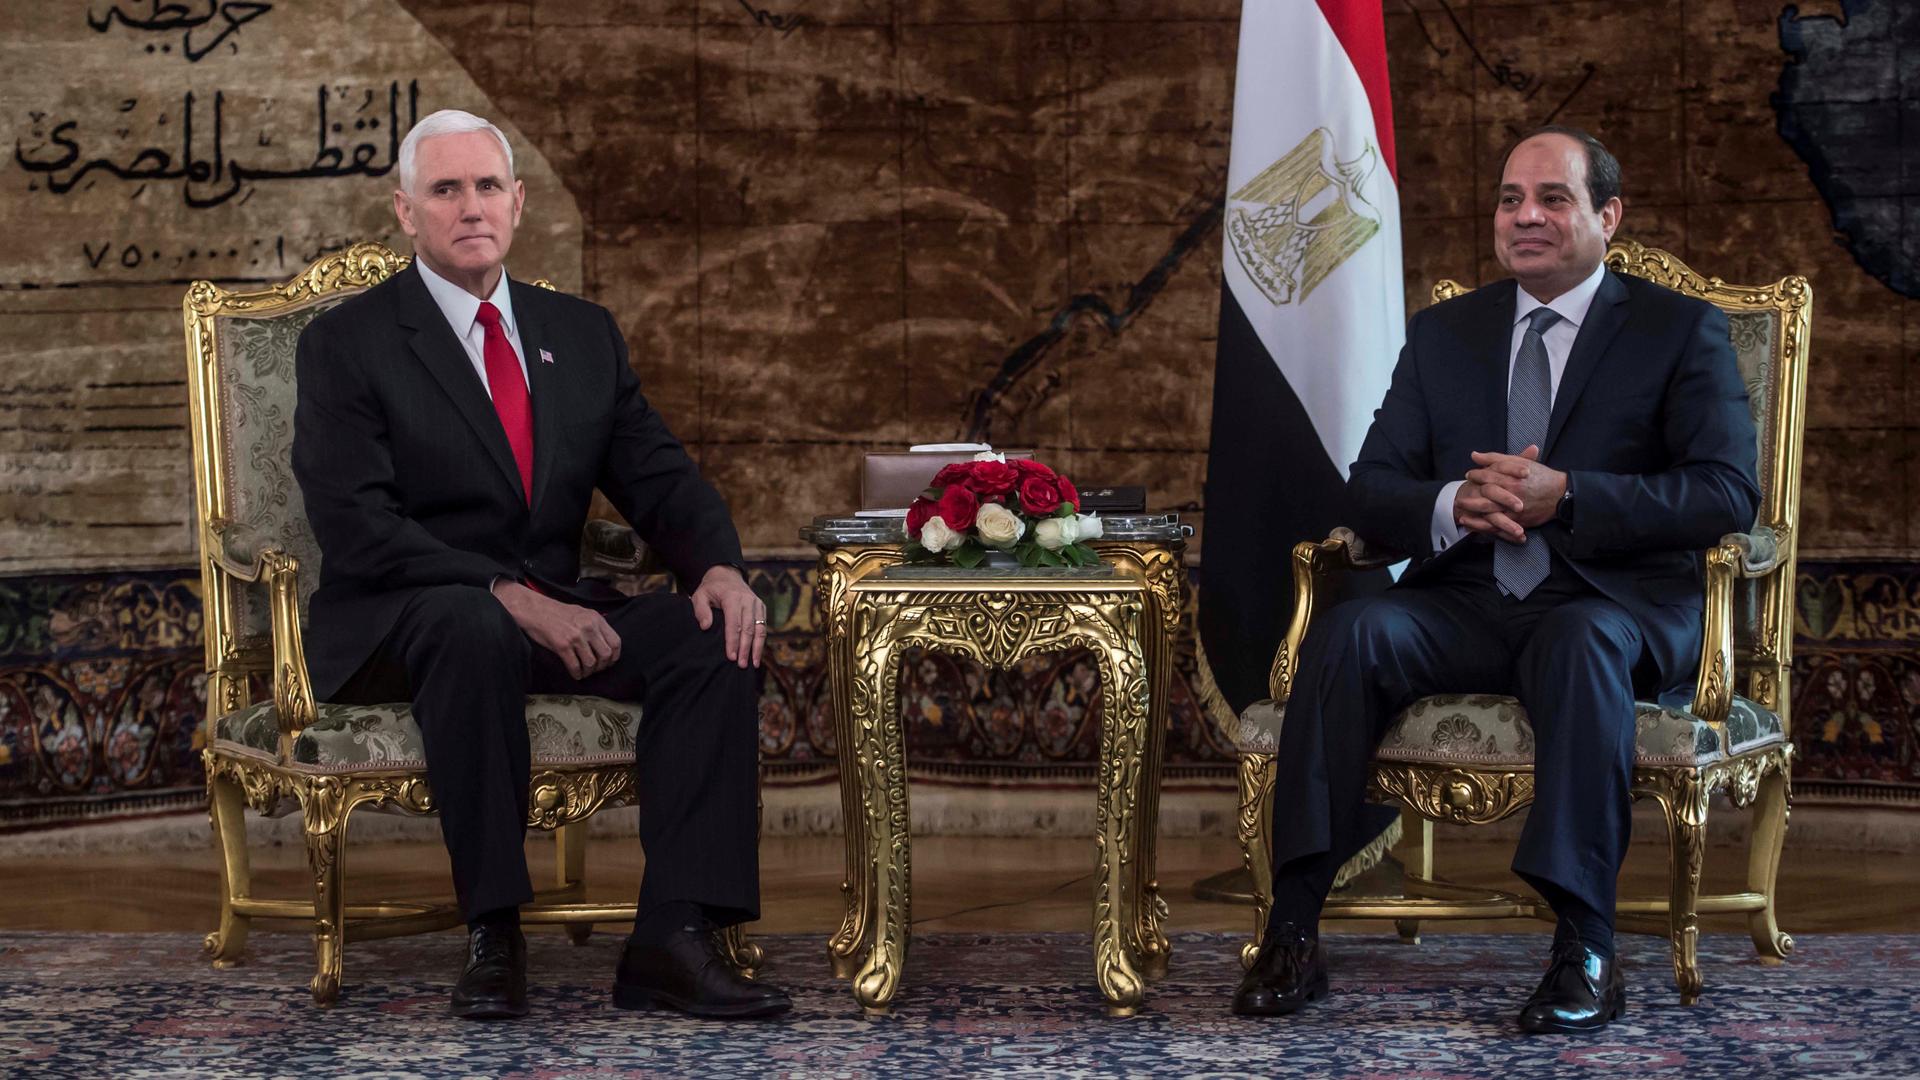 Egyptian President Abdel Fattah al-Sisi meets with with U.S. Vice President Mike Pence at the Presidential Palace in Cairo, Egypt on January 20, 2018.